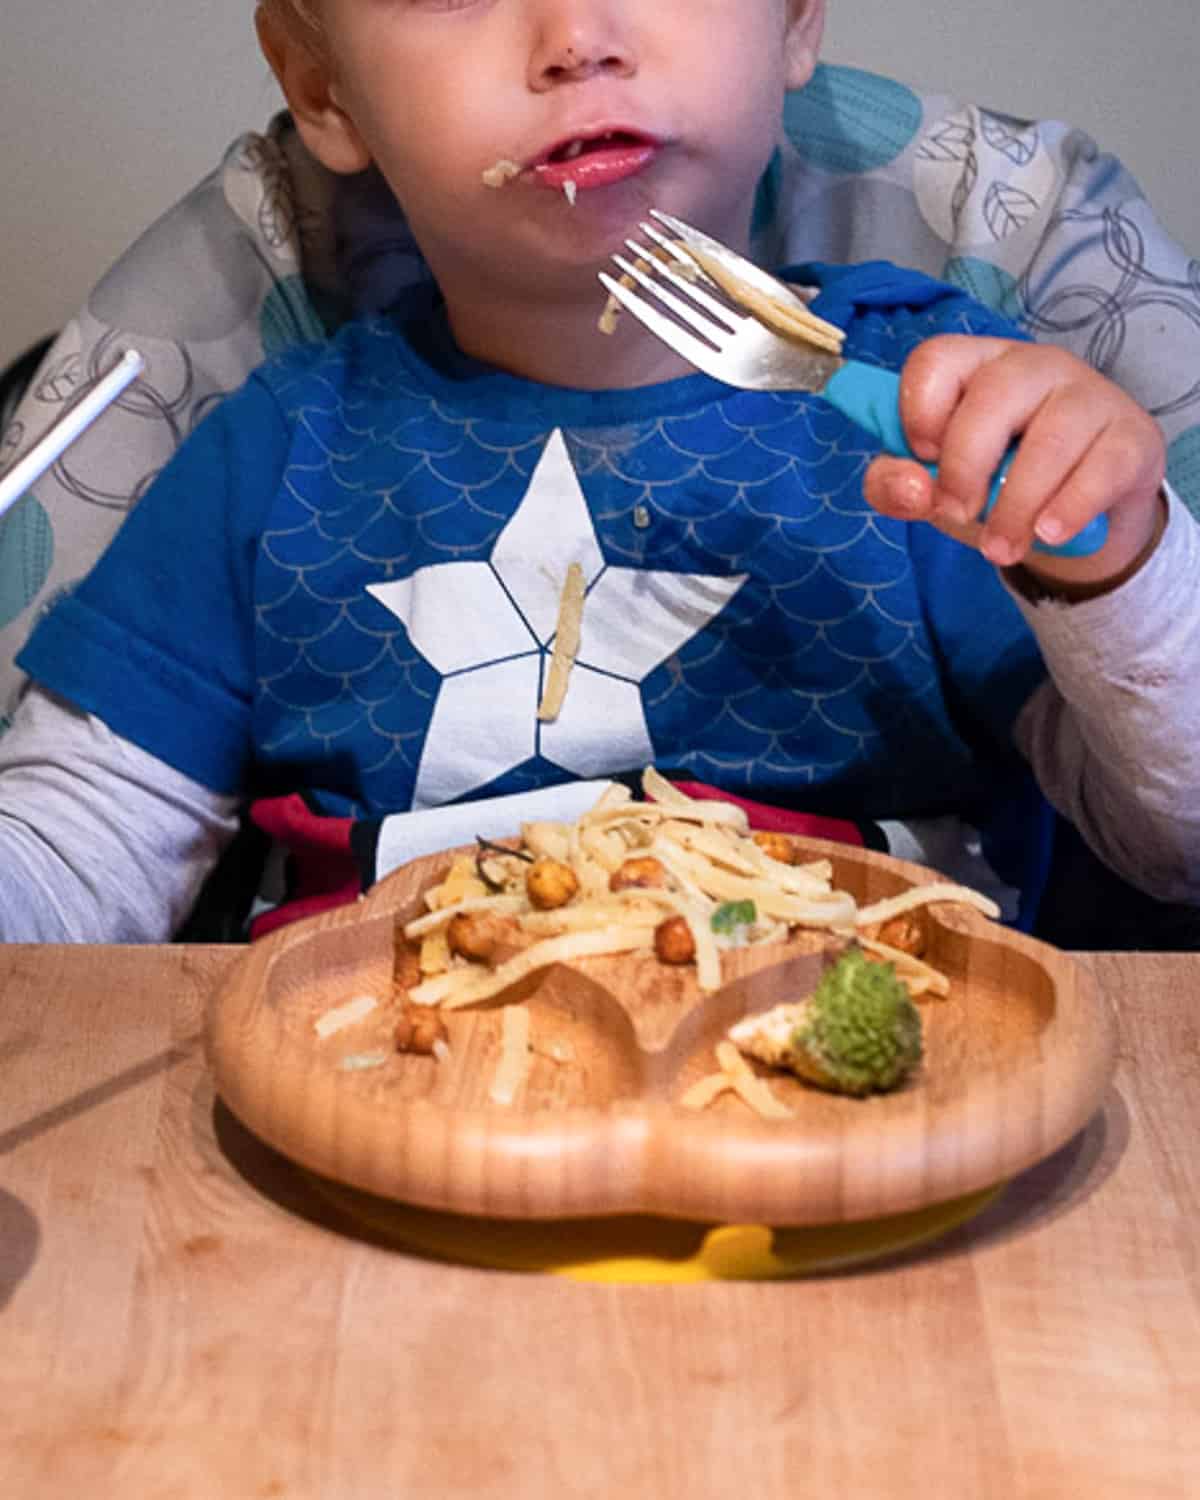 Child eating a plate of Bowl filled with vegan creamy pasta, with chickpeas, and romanesco cauliflower.